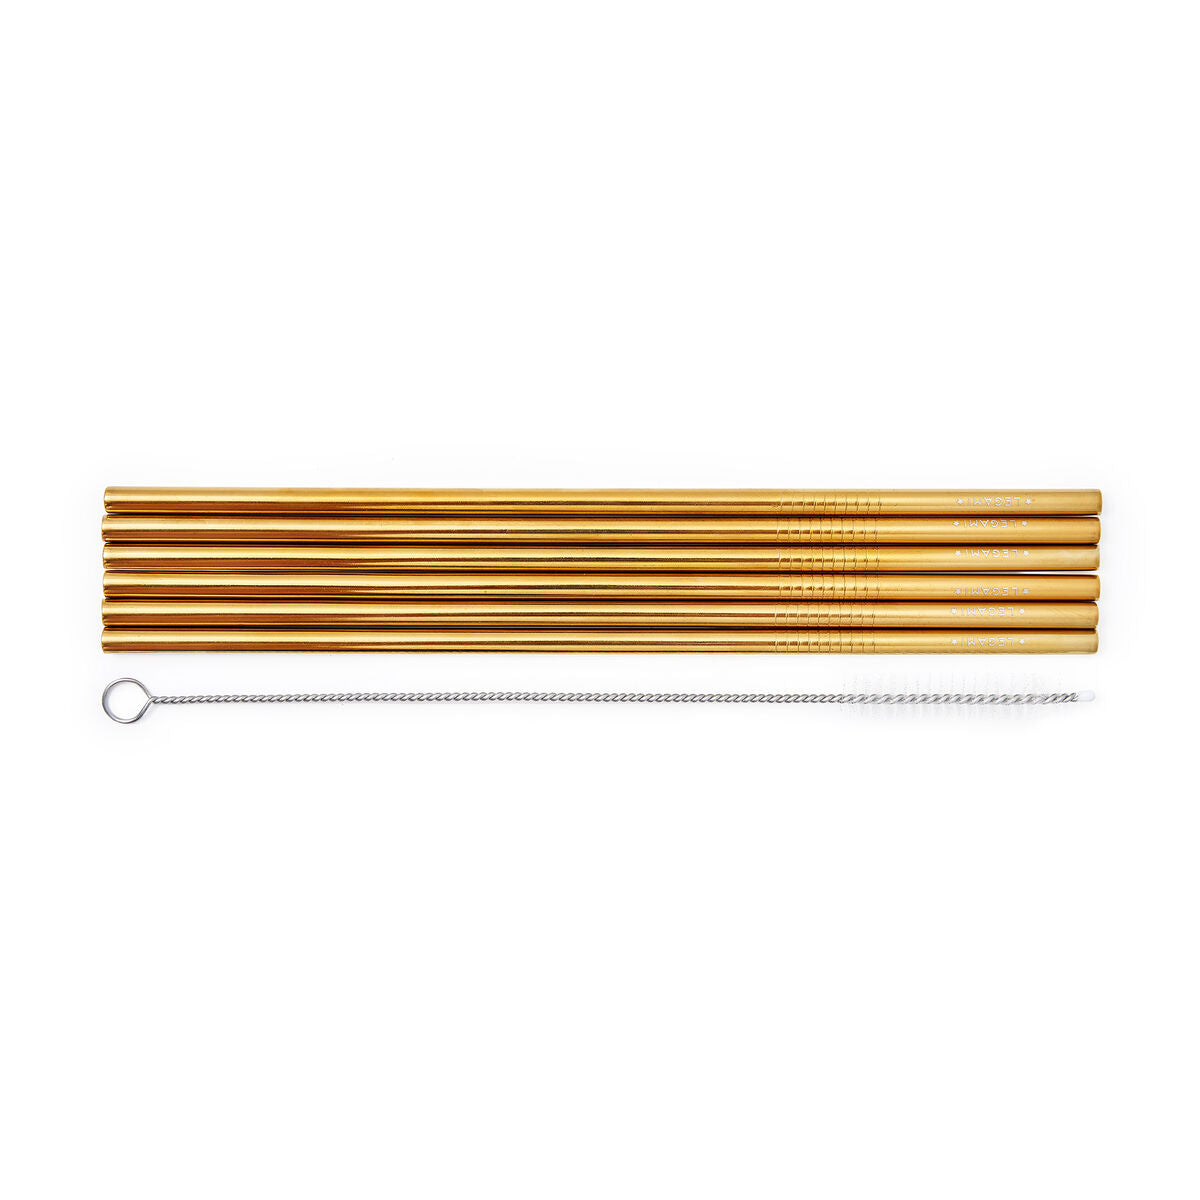 Fab Gifts | Legami Stainless Steel Straws - Set Of 6 by Weirs of Baggot Street